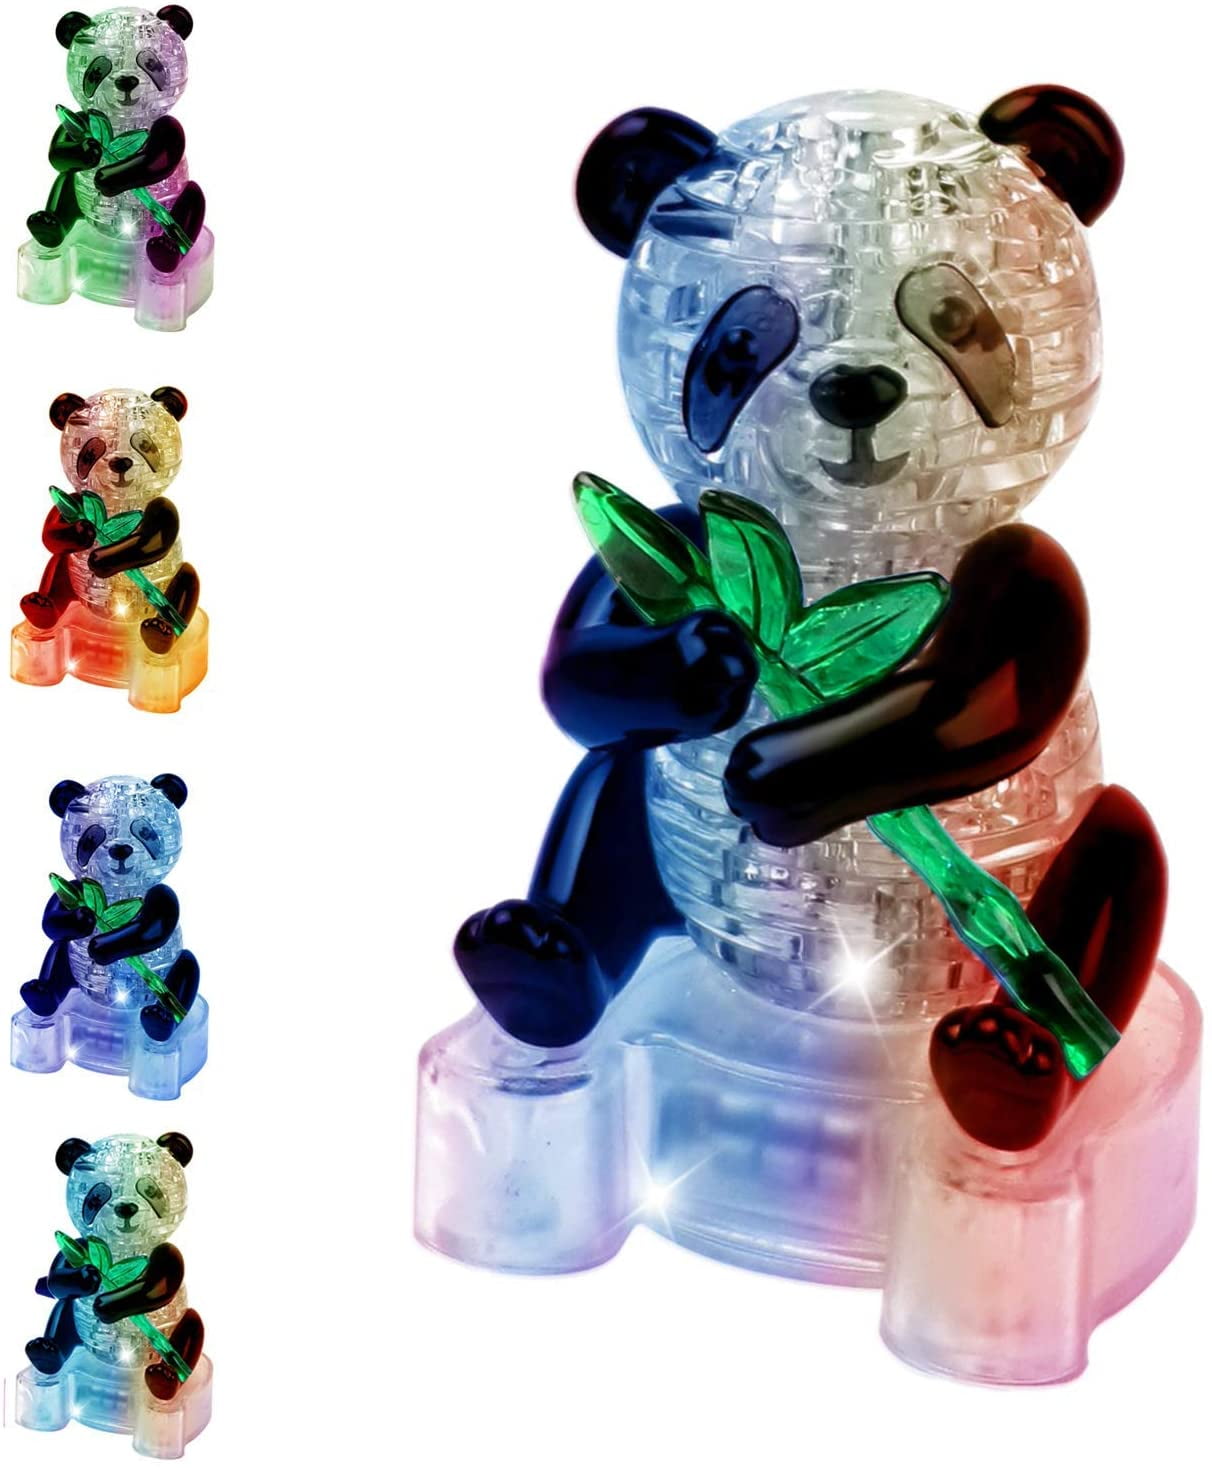 3D LED LIGHT UP PANDA PUZZLE WITH STAND JIGSAW COLOUR CHANGING  CRYSTAL GI N Hot 